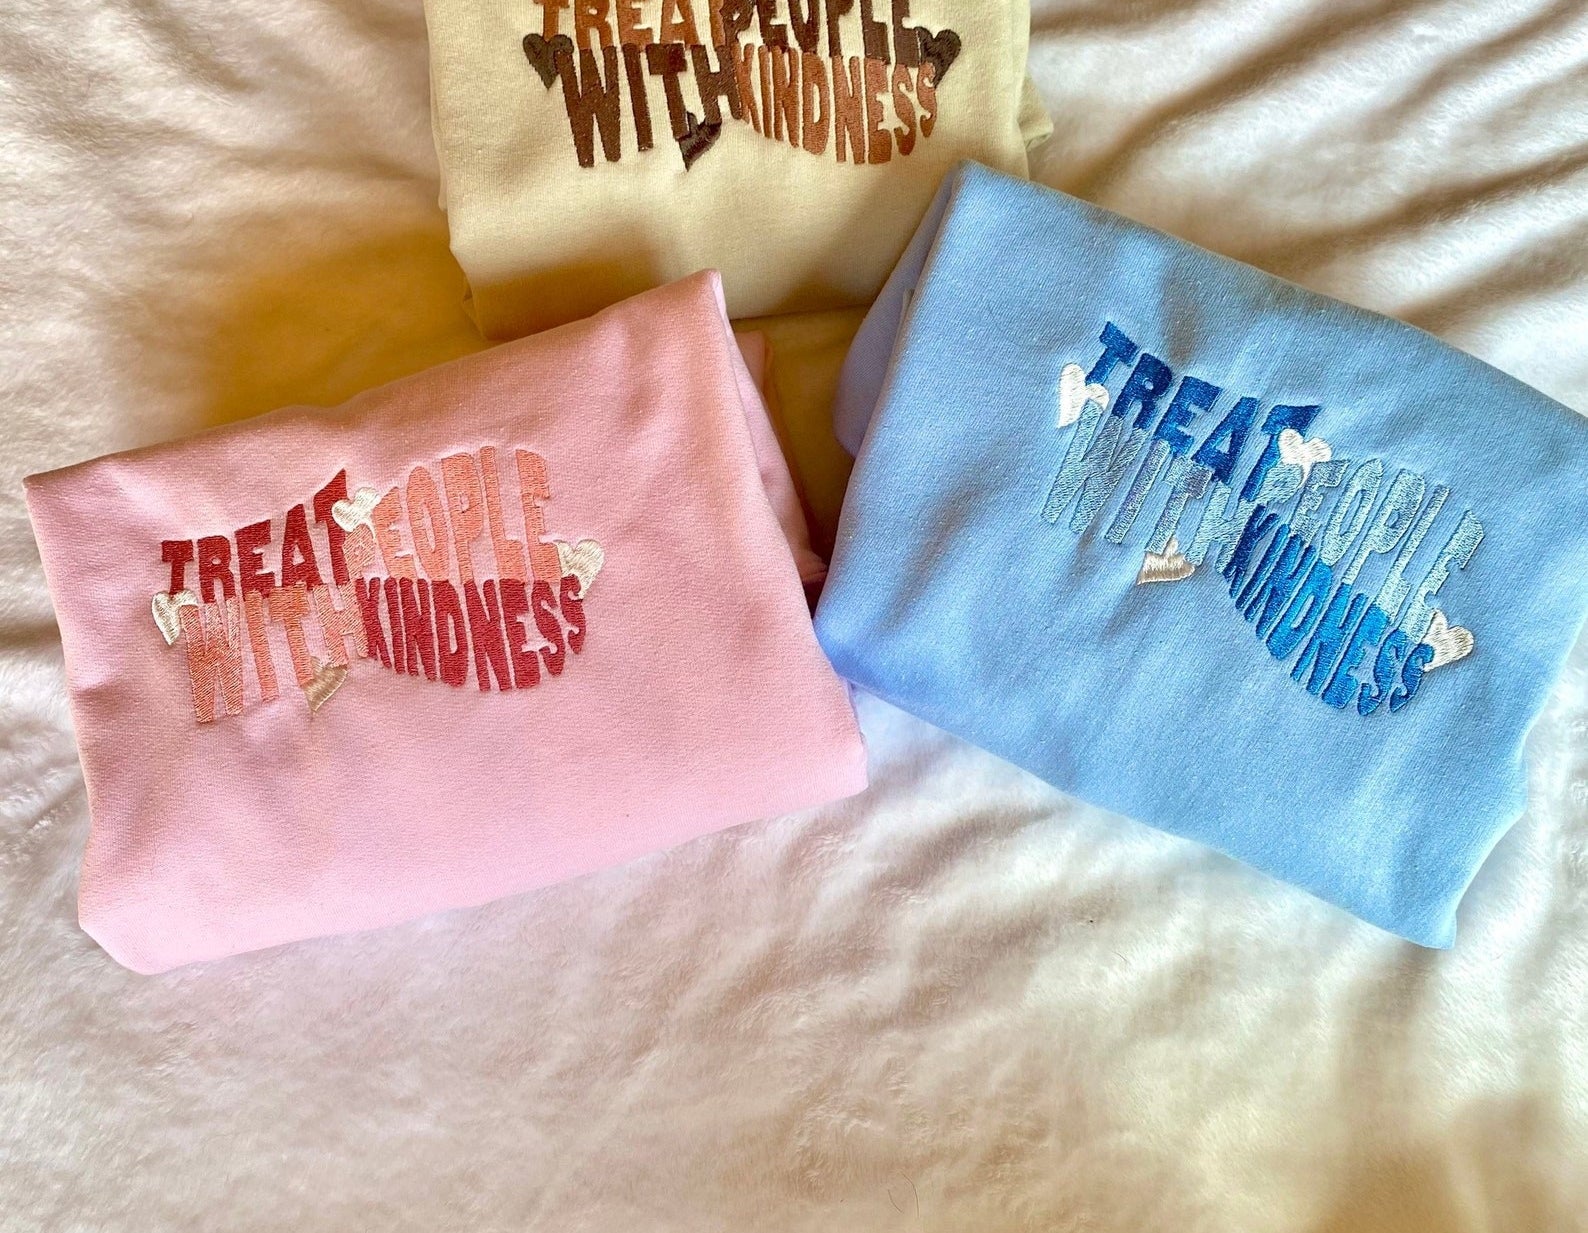 The sweaters embroidered with treat people with kindness in pink, blue, and yellow